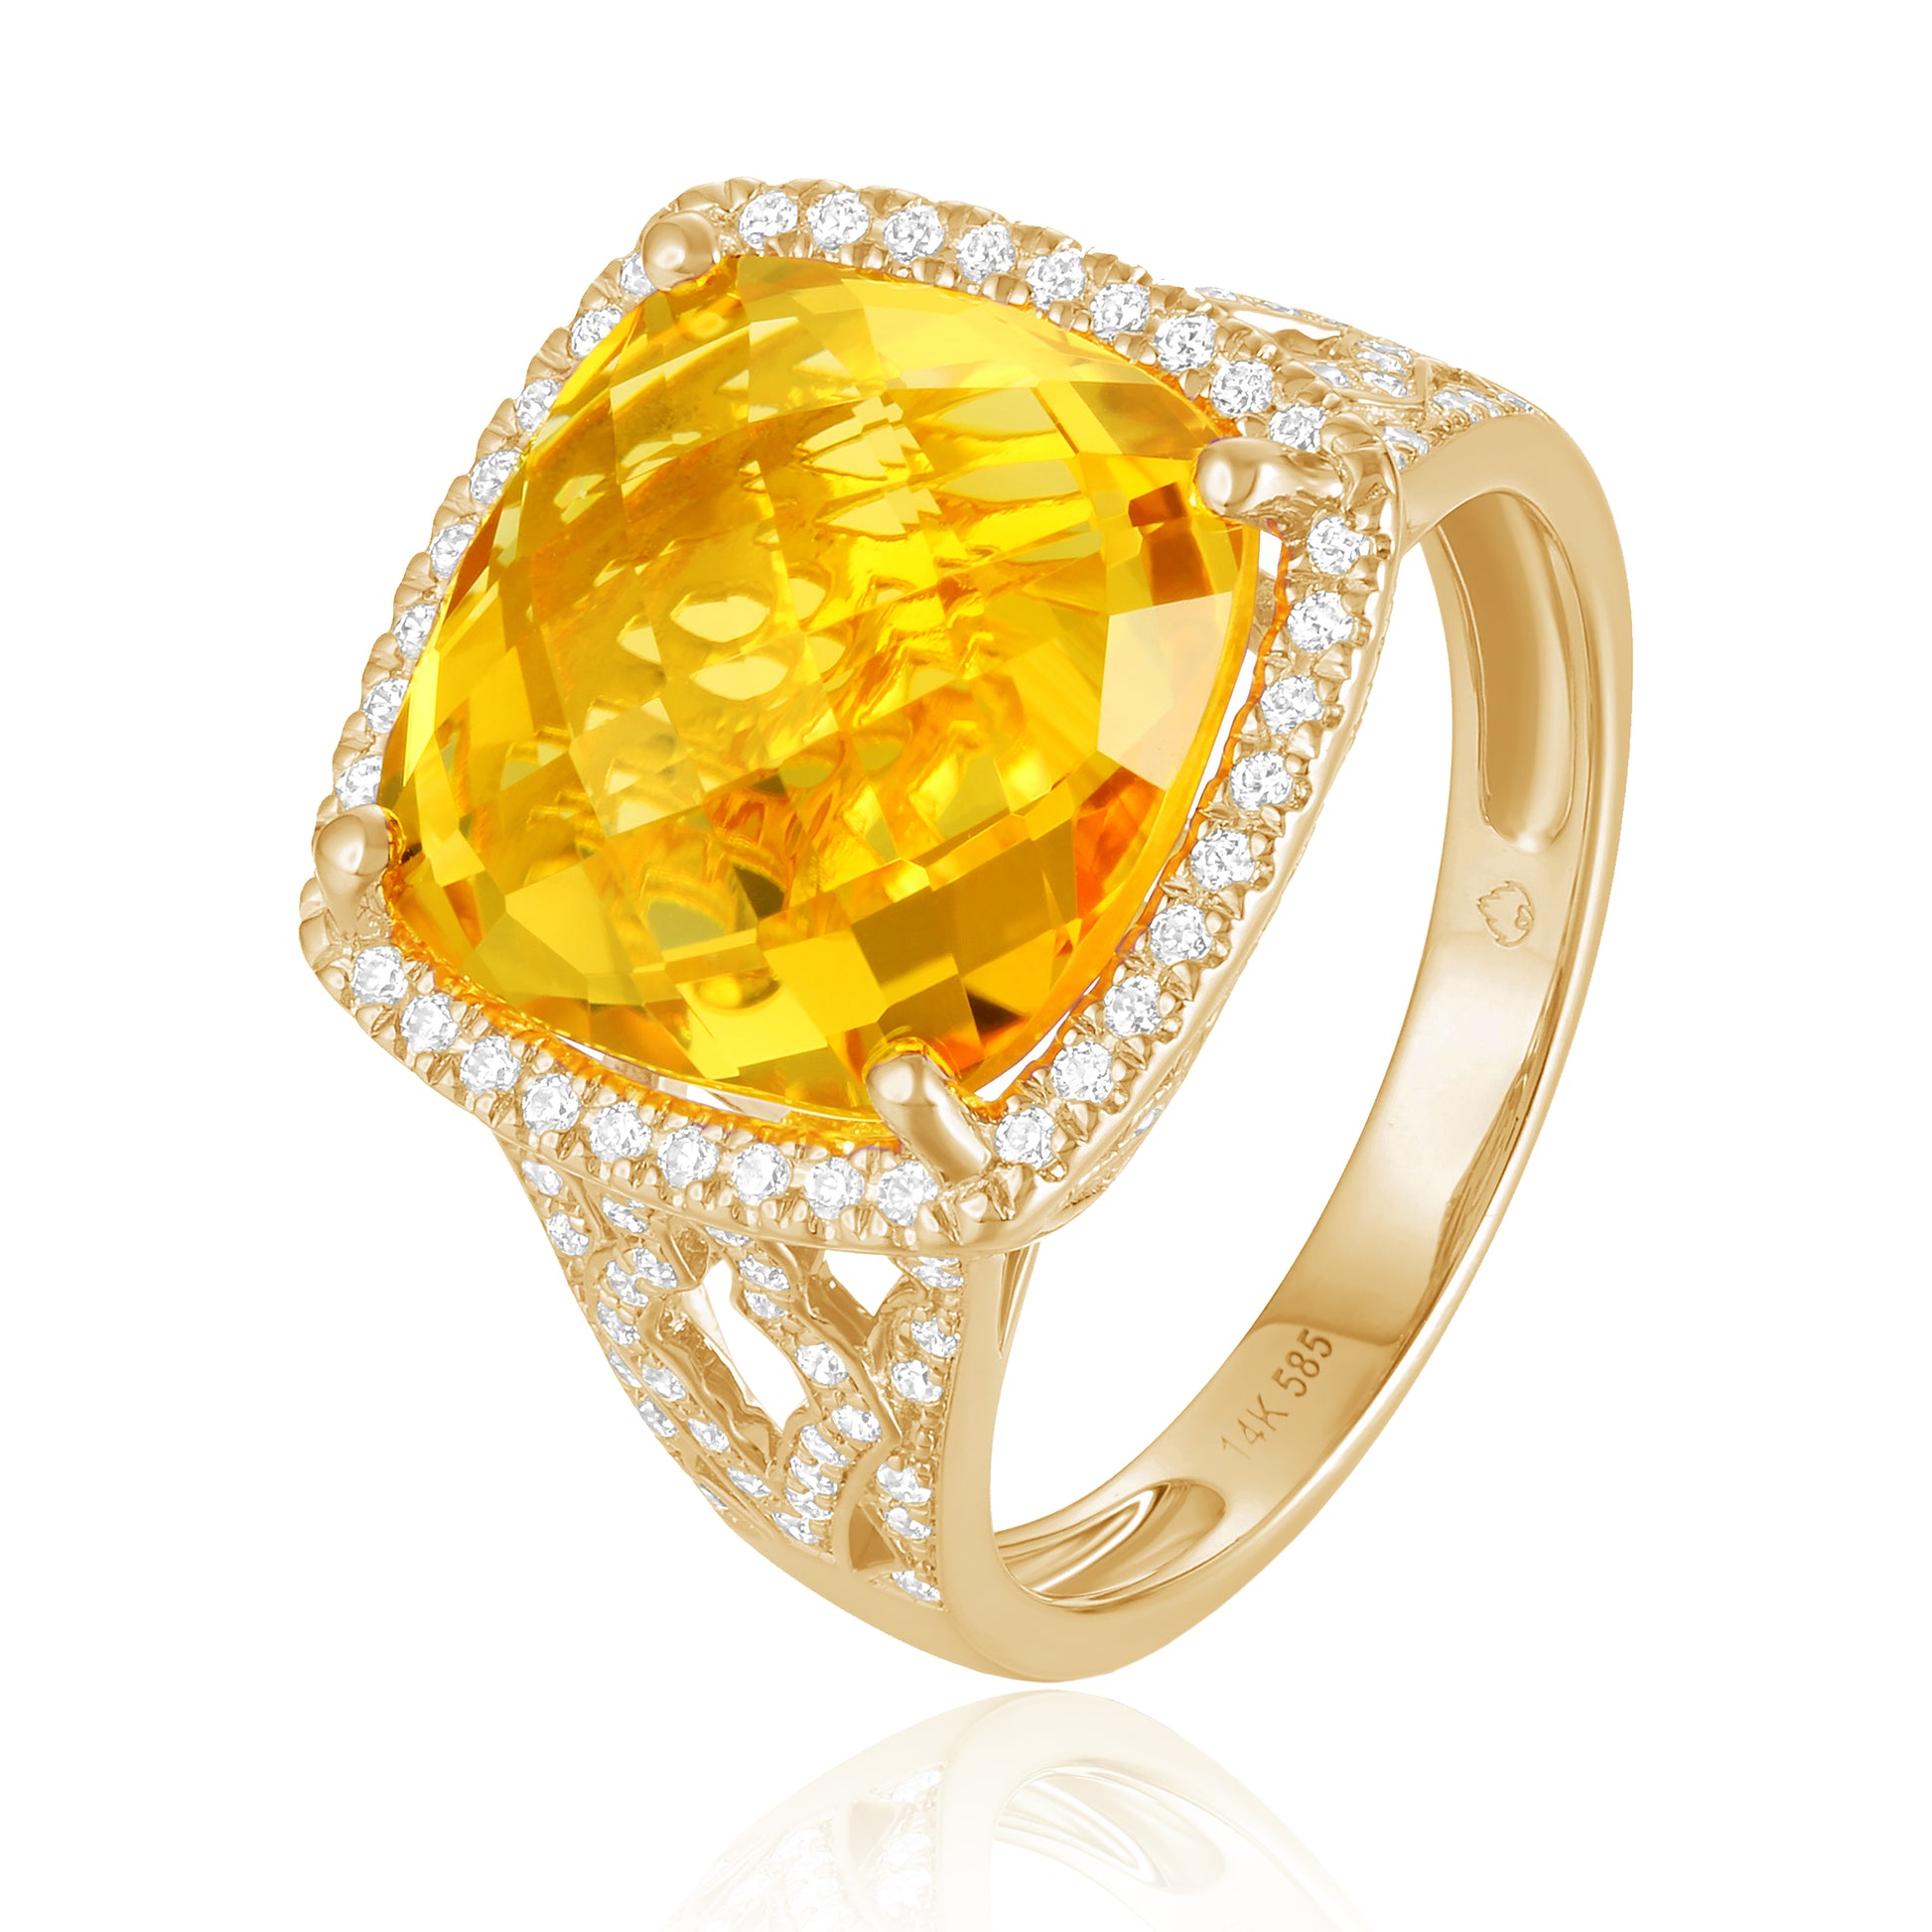 Luvente Yellow Gold Citrine & Diamond Halo Ring - Colored Stone Rings - Women's